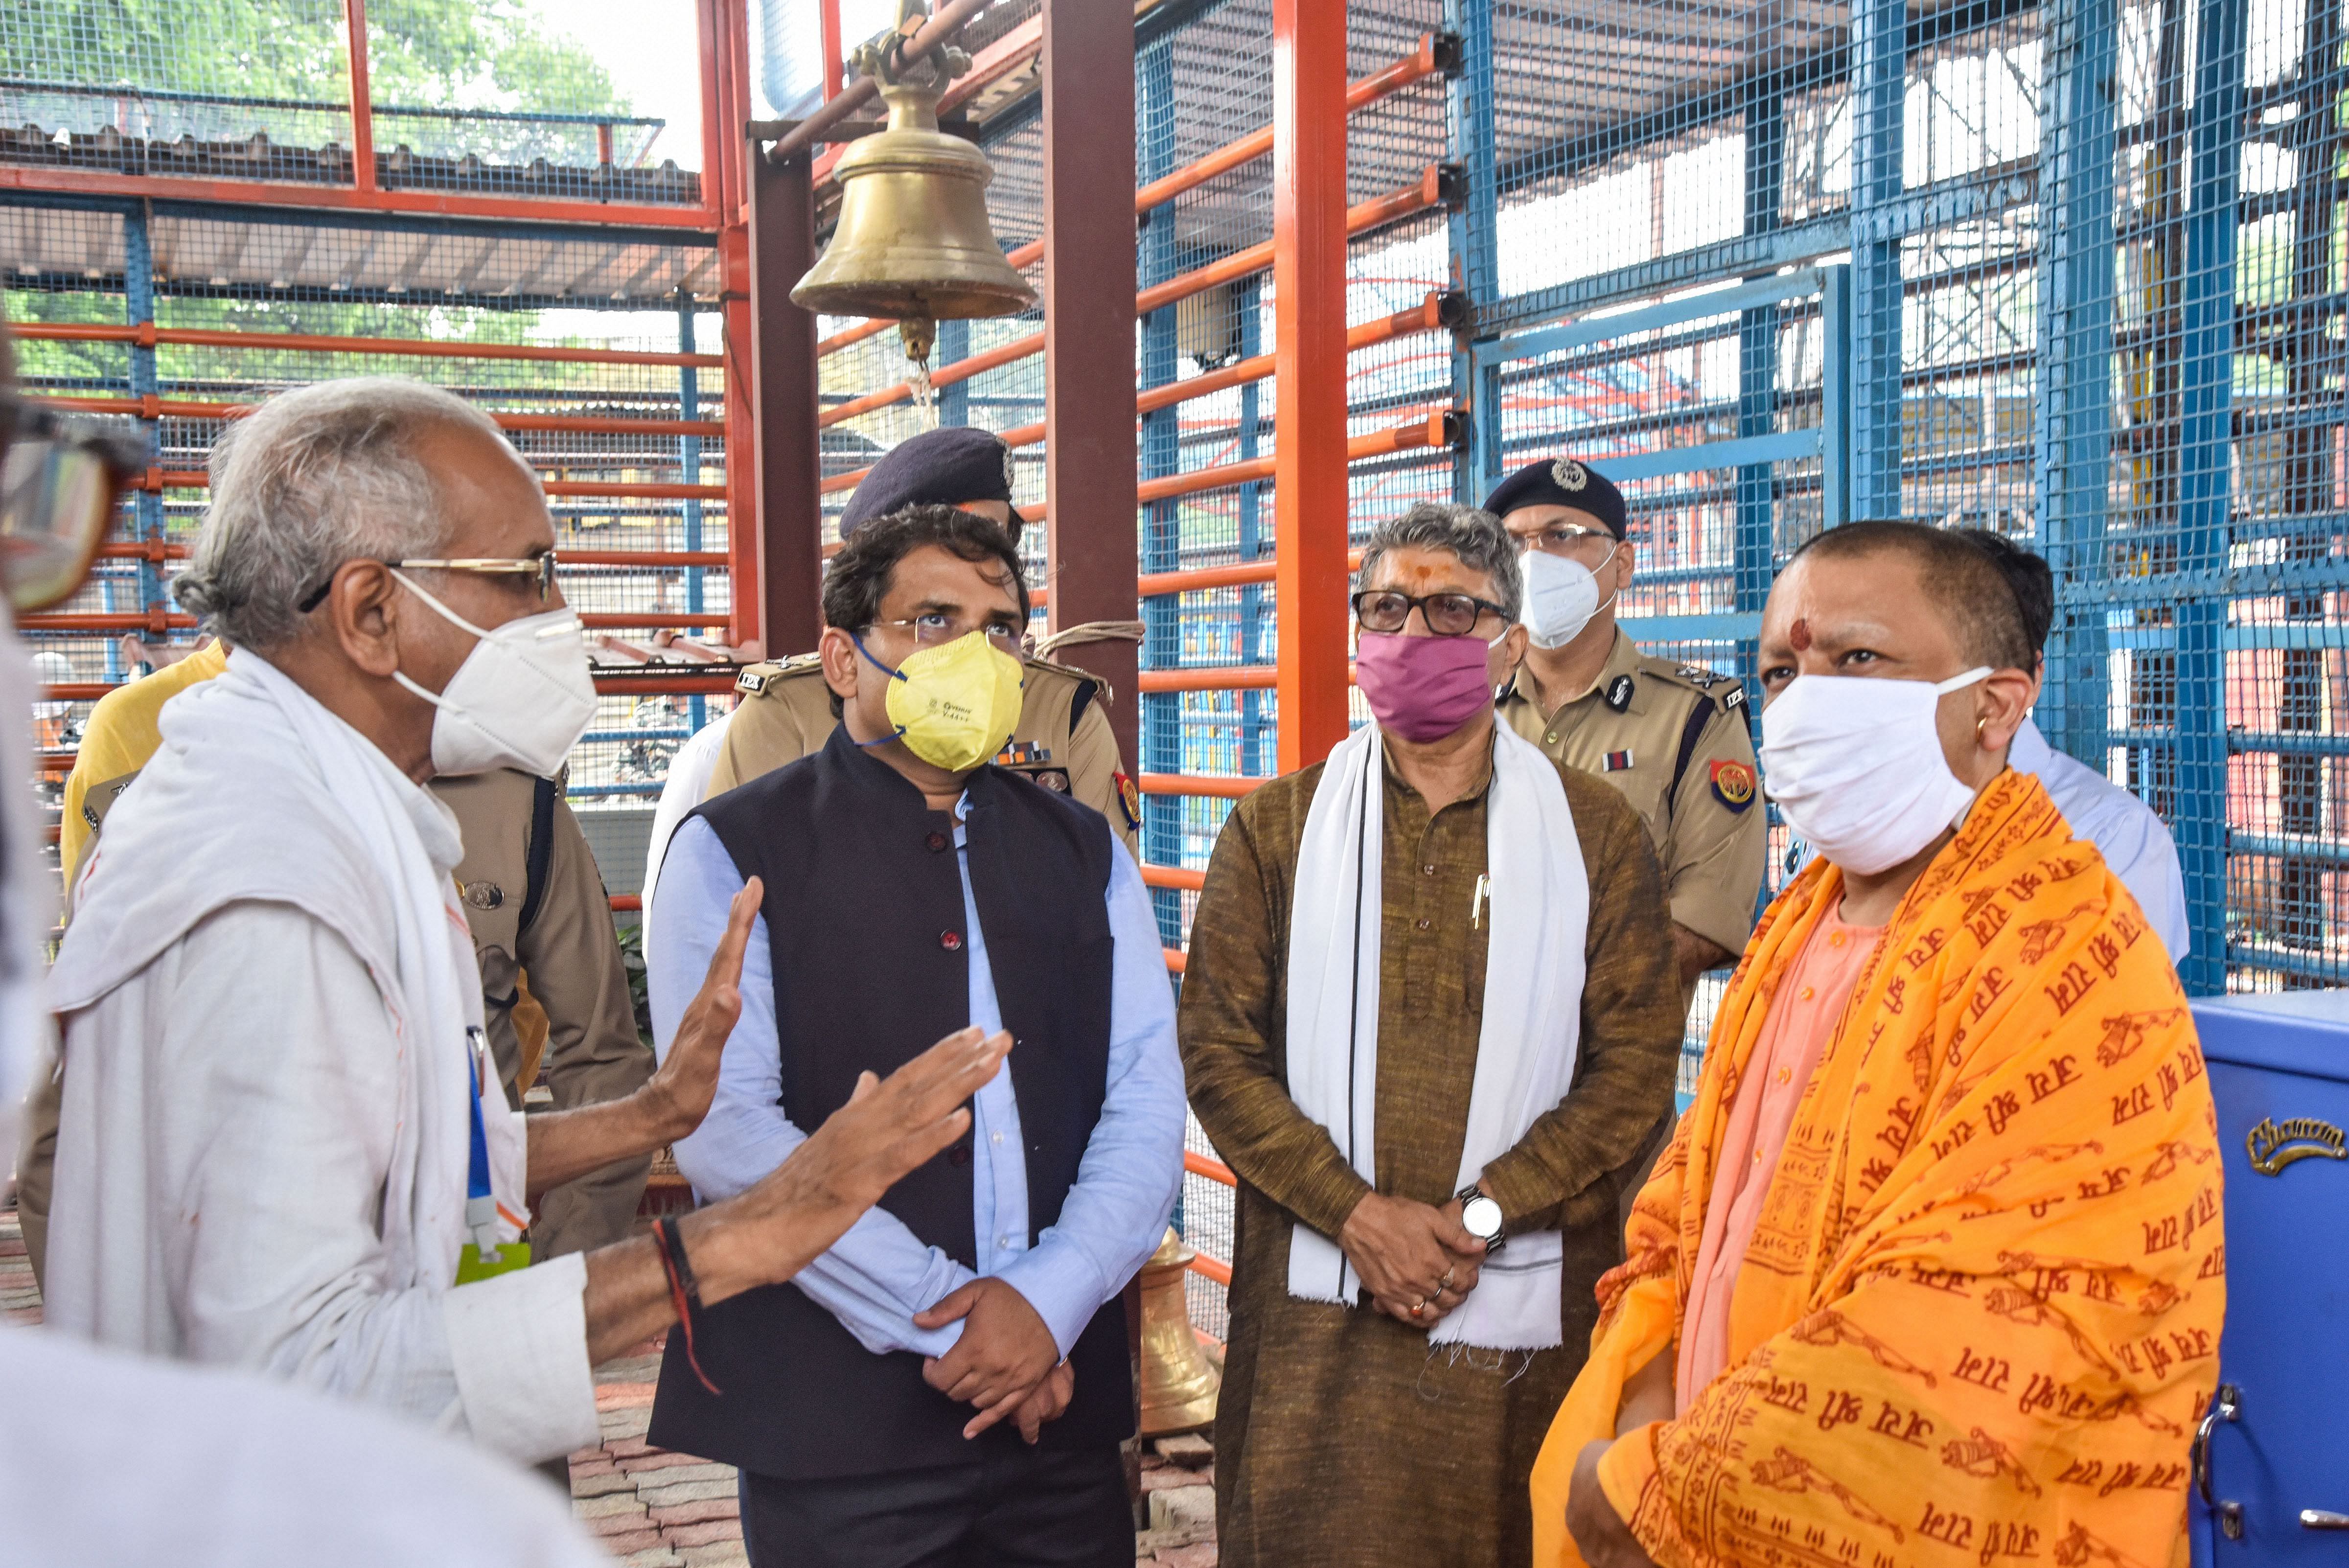 “The also told us that we have won half the battle against coronavirus and remaining half too would be won soon,” he quoted Adityanath as saying. Credit: PTI Photo